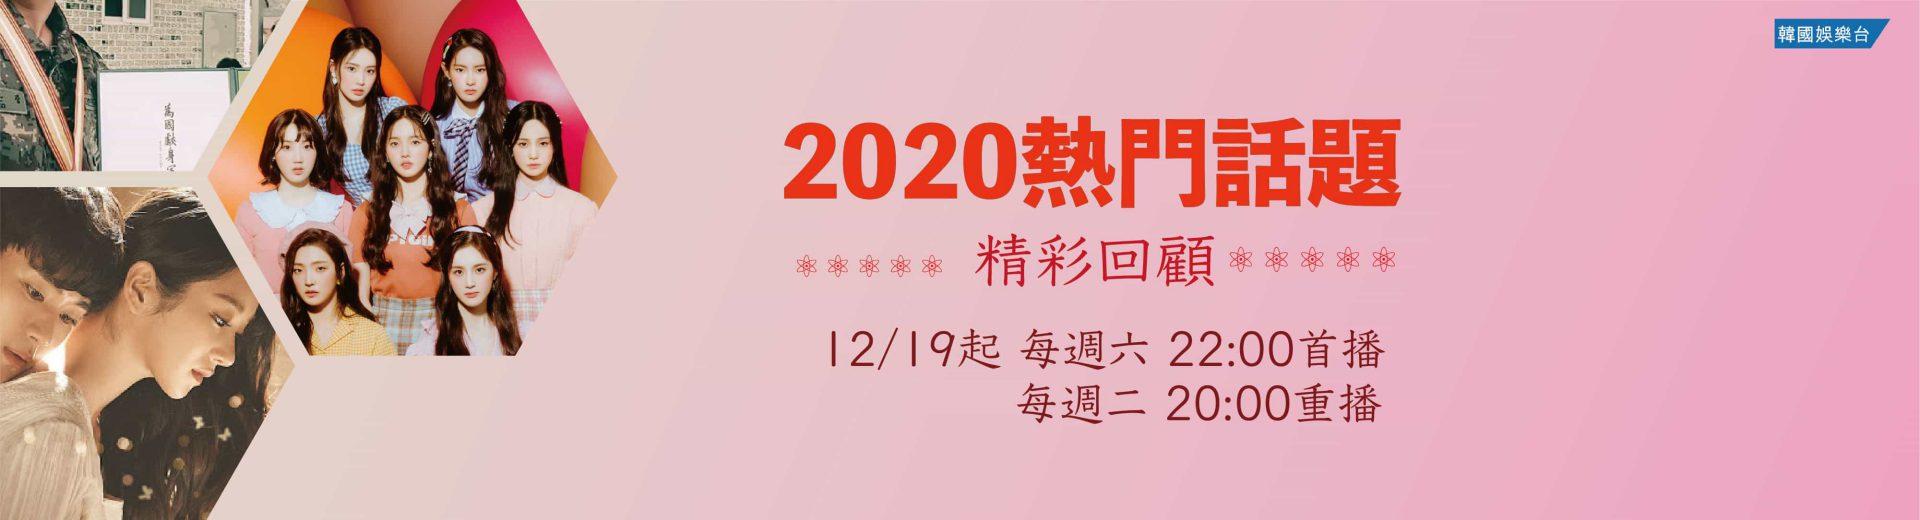 2020 Hot Issue / 2020熱門話題